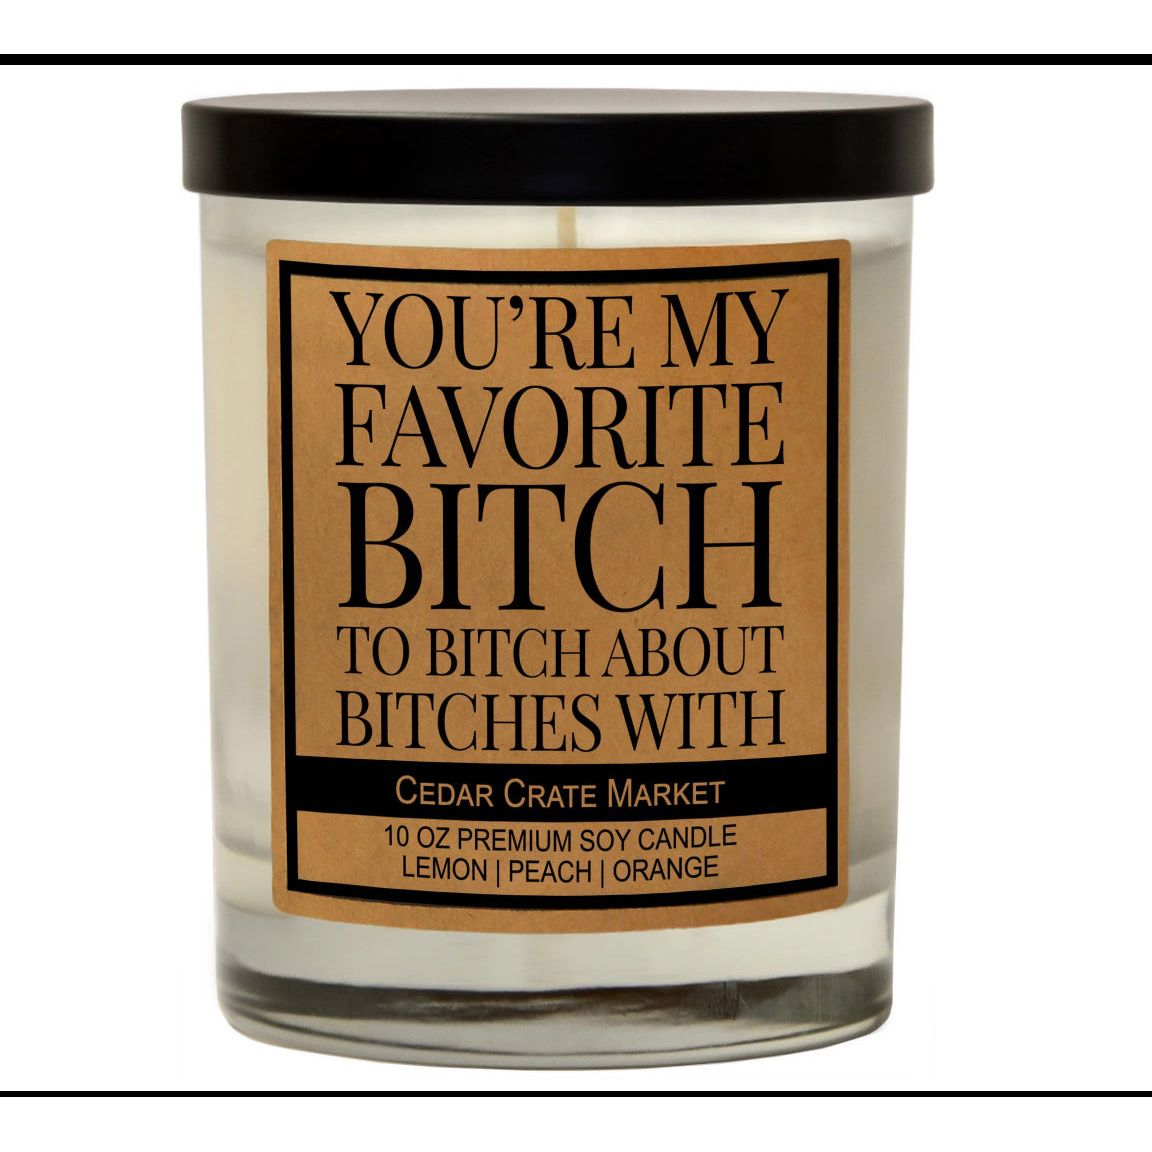 My favorite candle